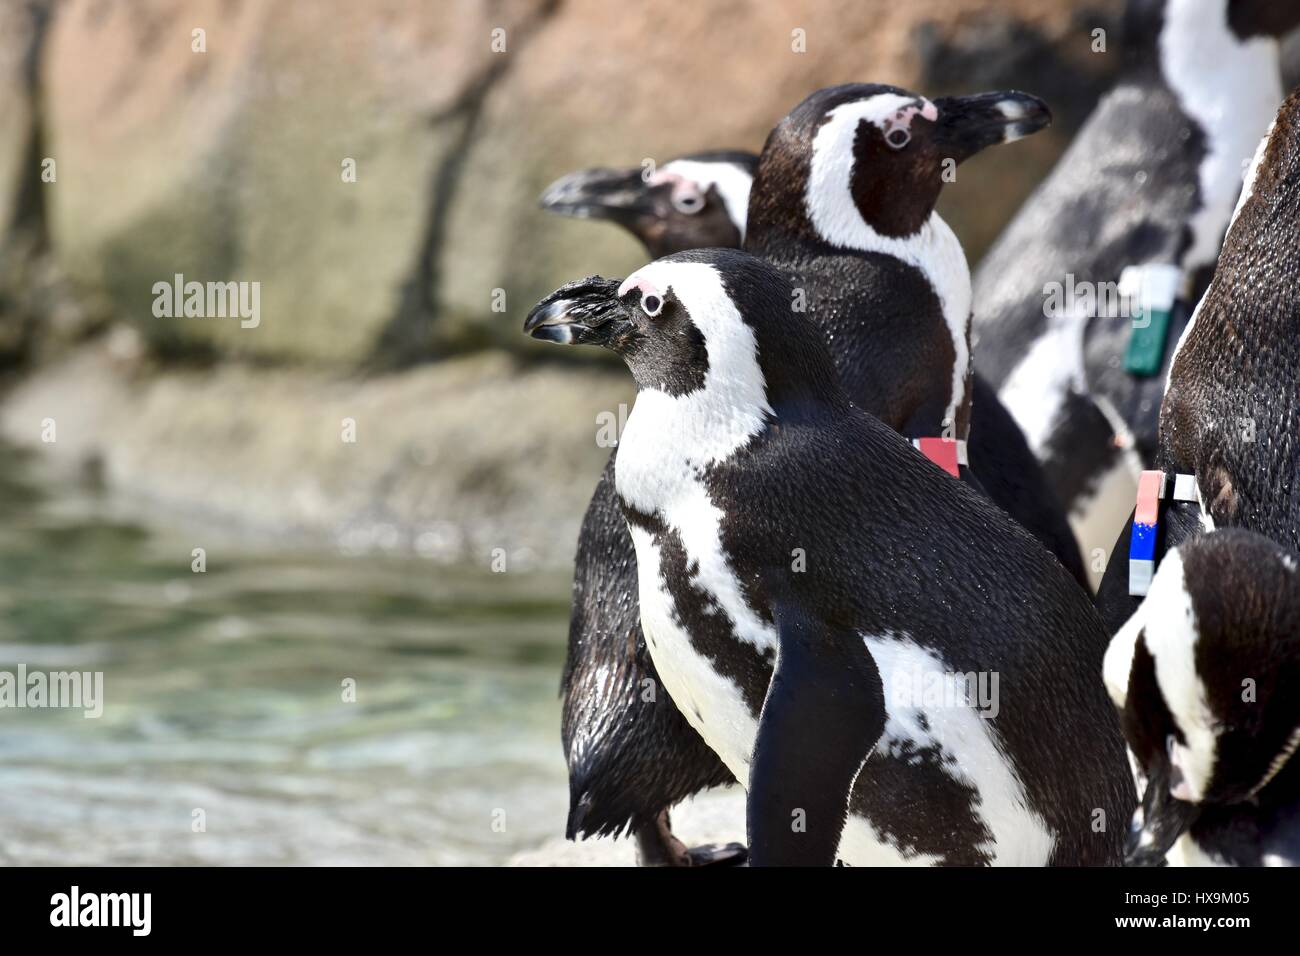 Baltimore, USA. 25th March 2017. African Penguins (Spheniscus demersus) enjoying a warm spring day at the Maryland Zoo. Photo Credit: Jeramey Lende/Alamy Live News Stock Photo